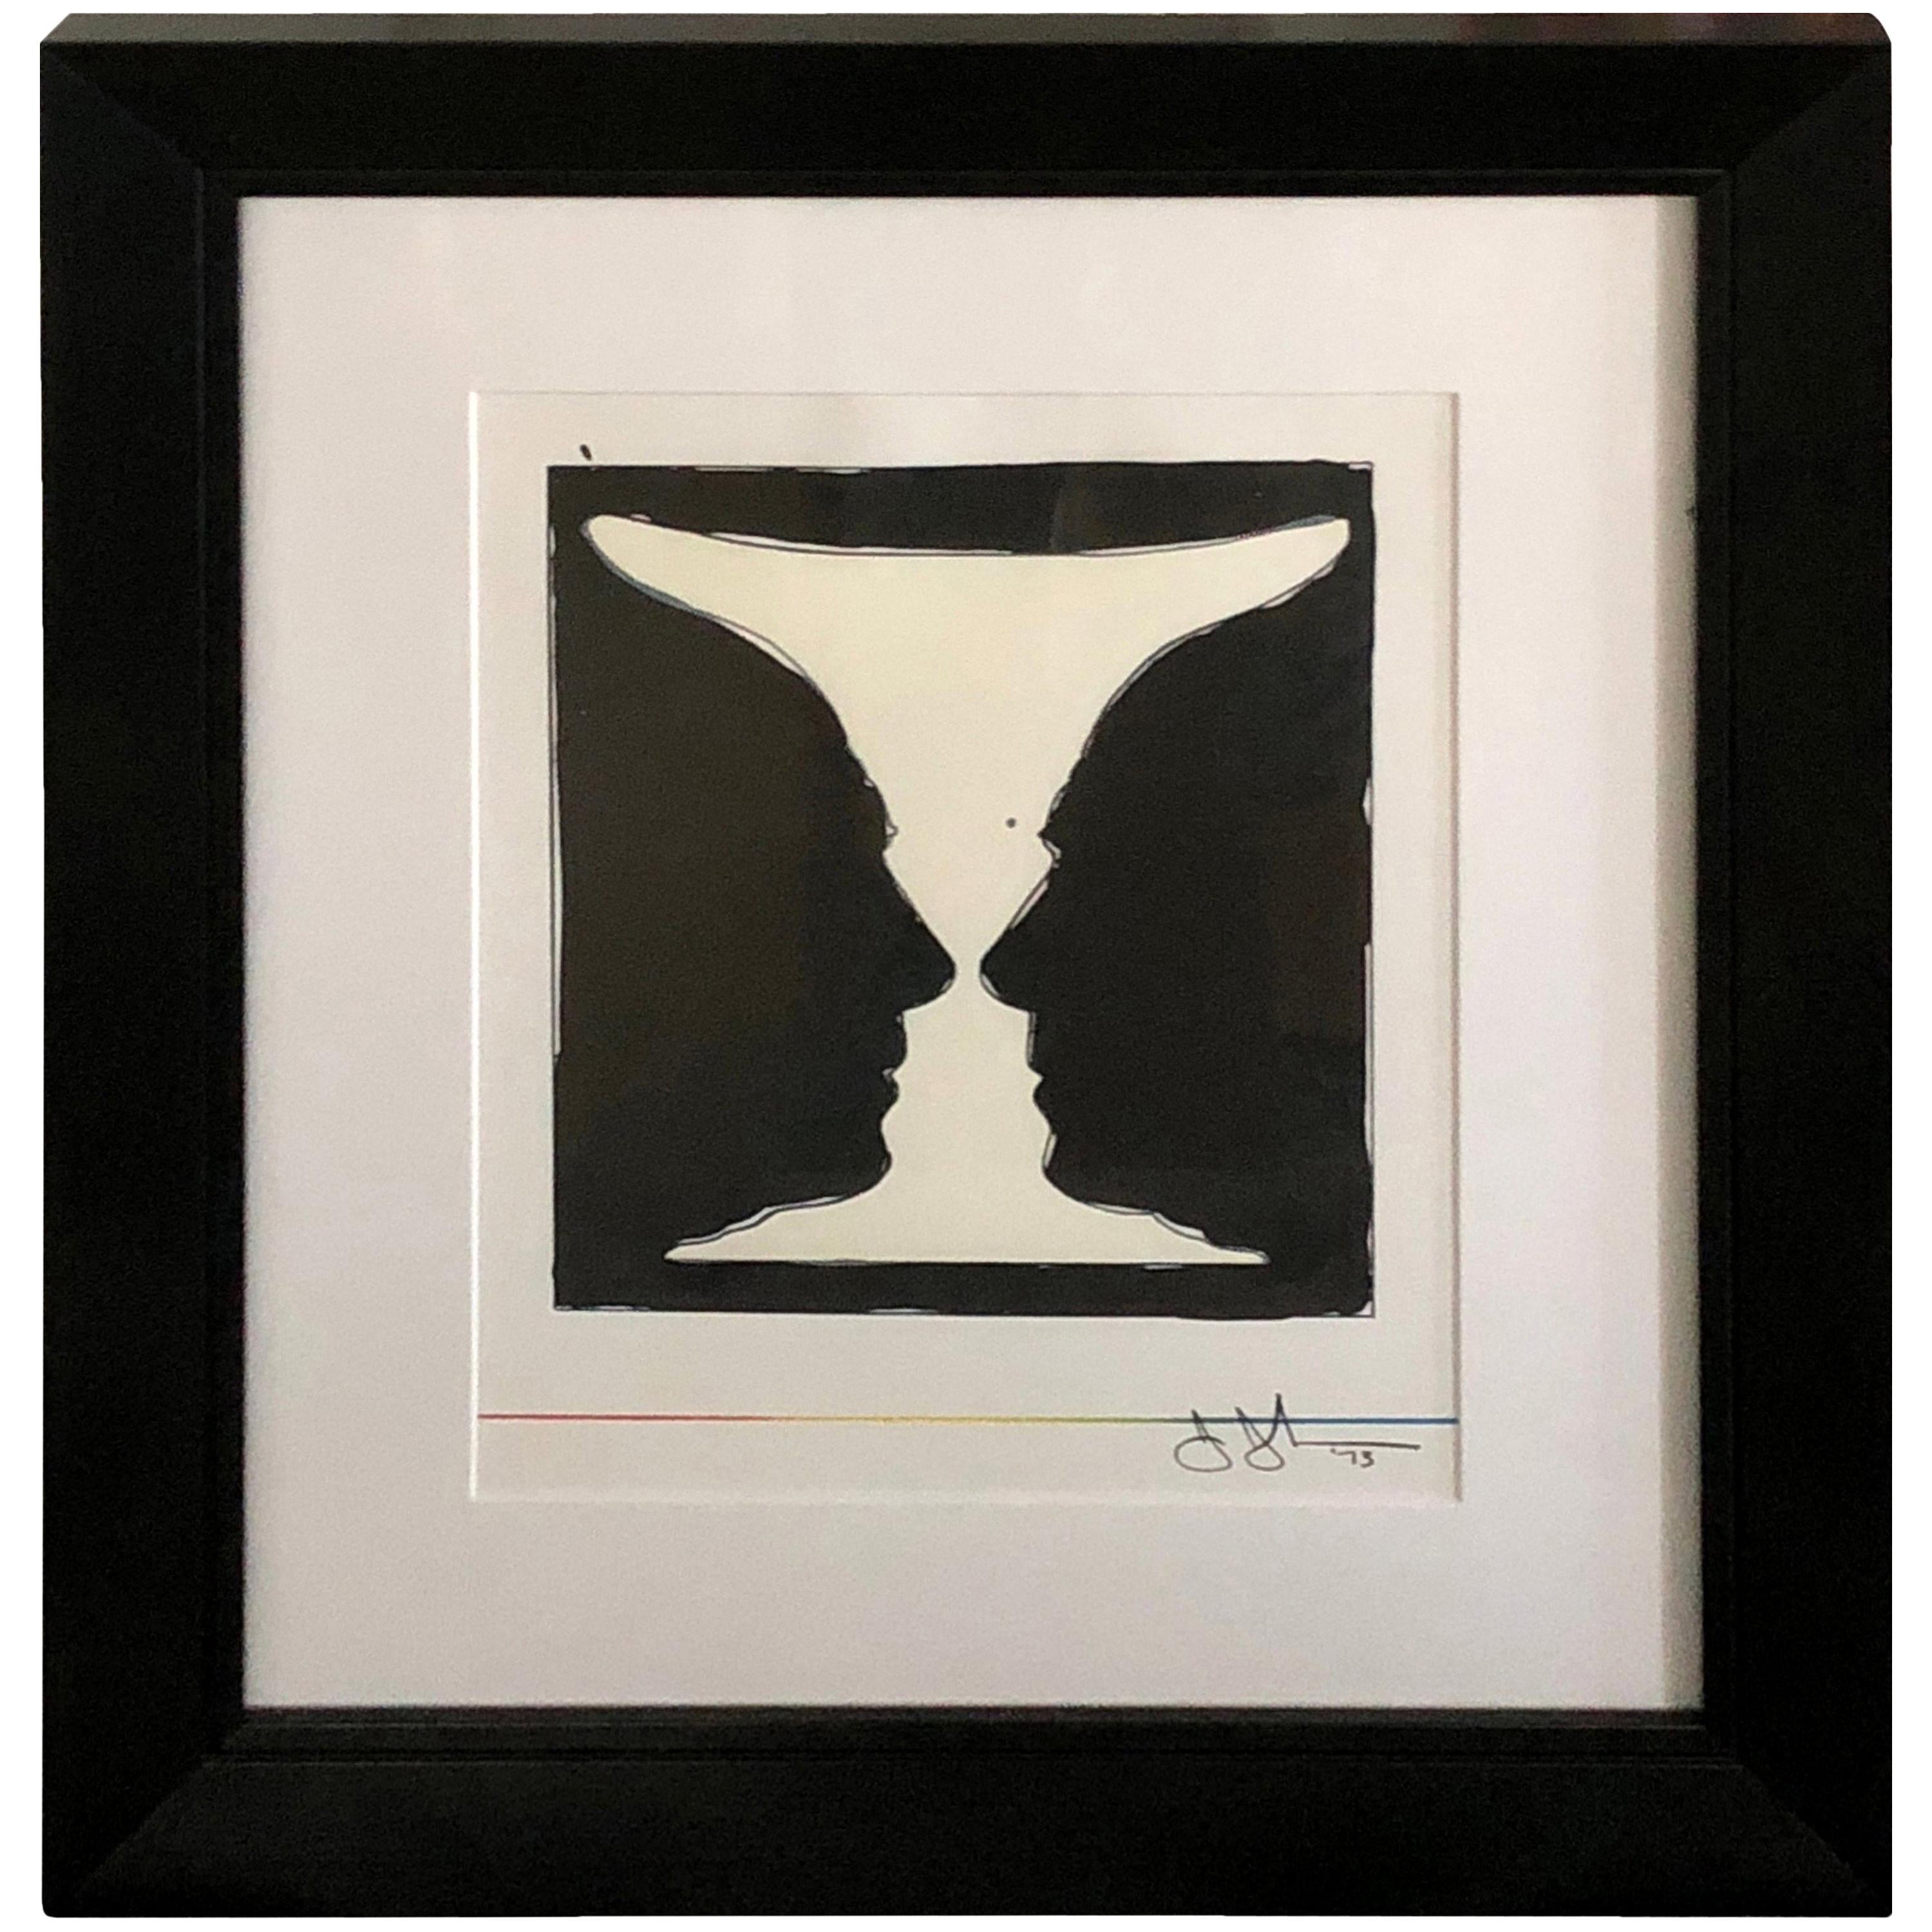 Century Black and White Jasper Johns Lithograph, Cup Two Picasso, 1973